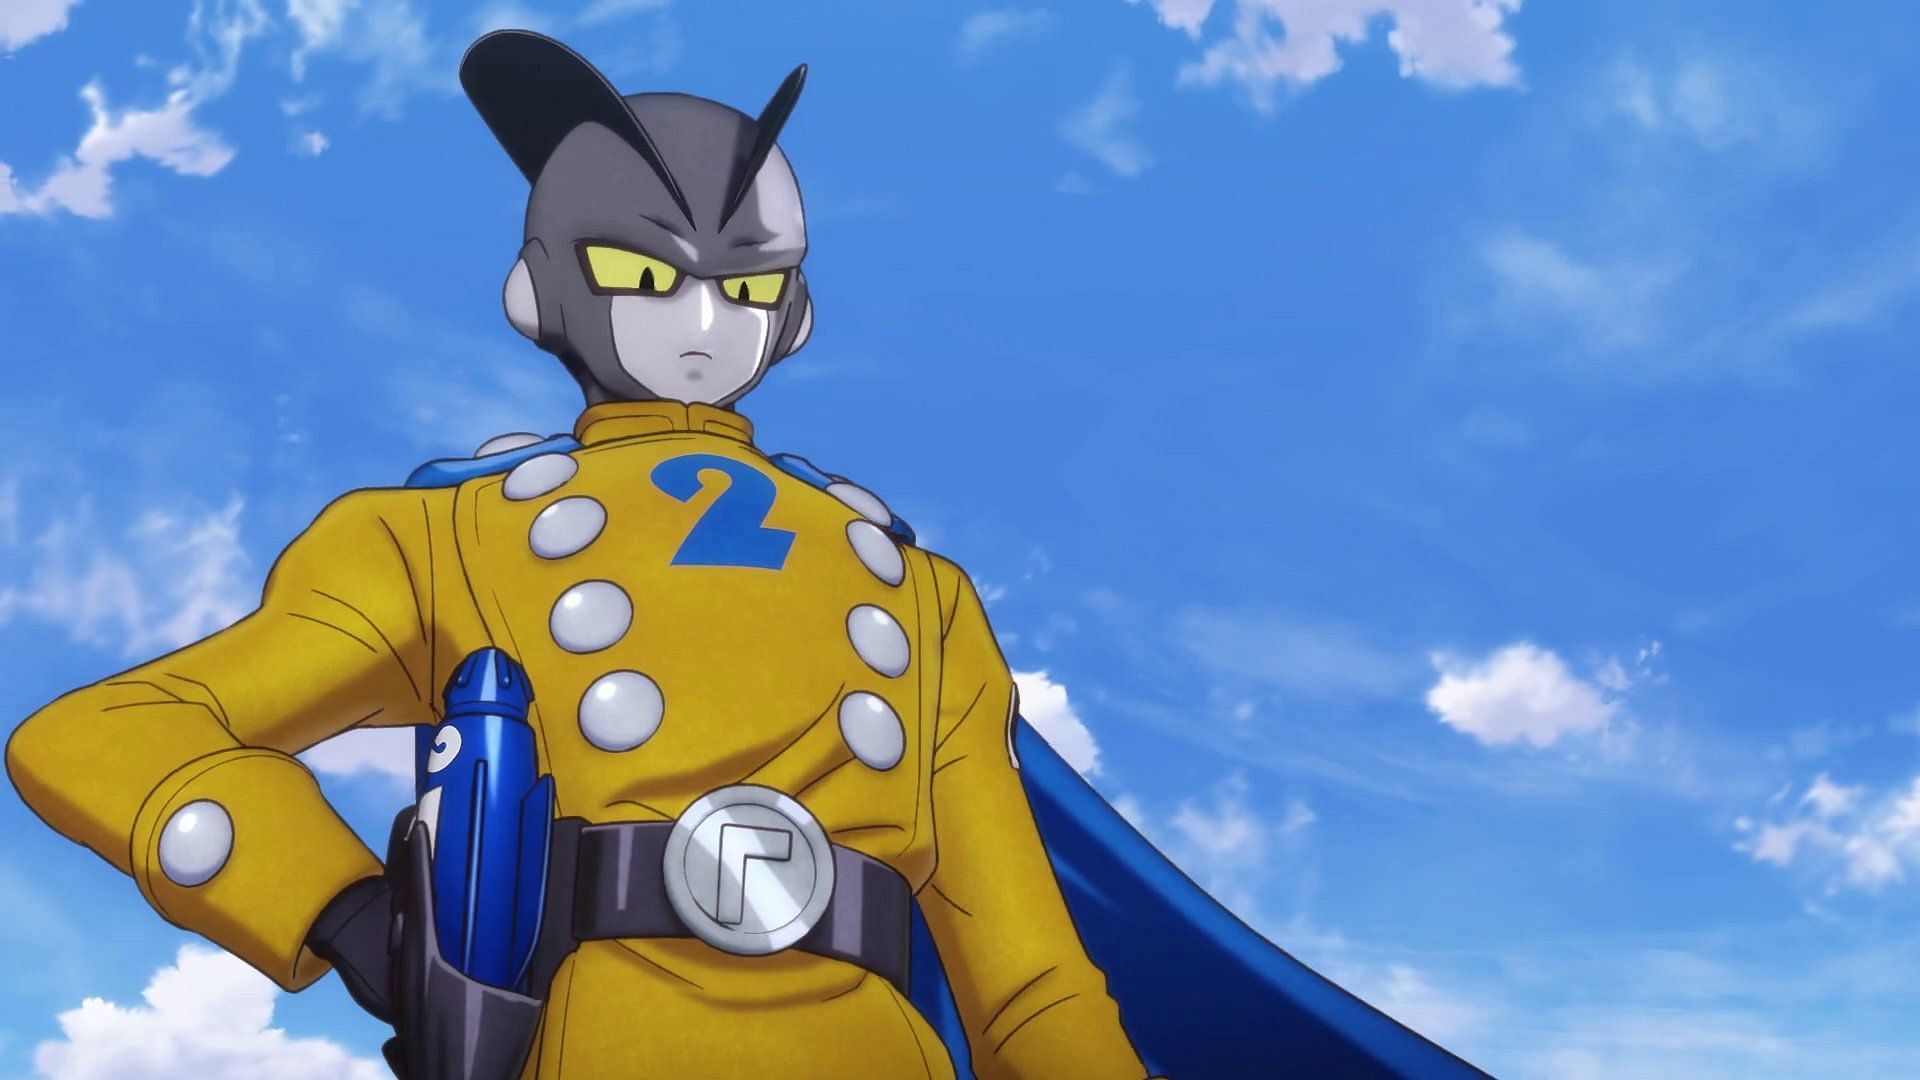 Dragon Ball Super: Super Hero: Gohan saved from Cell in the most unexpected way ever